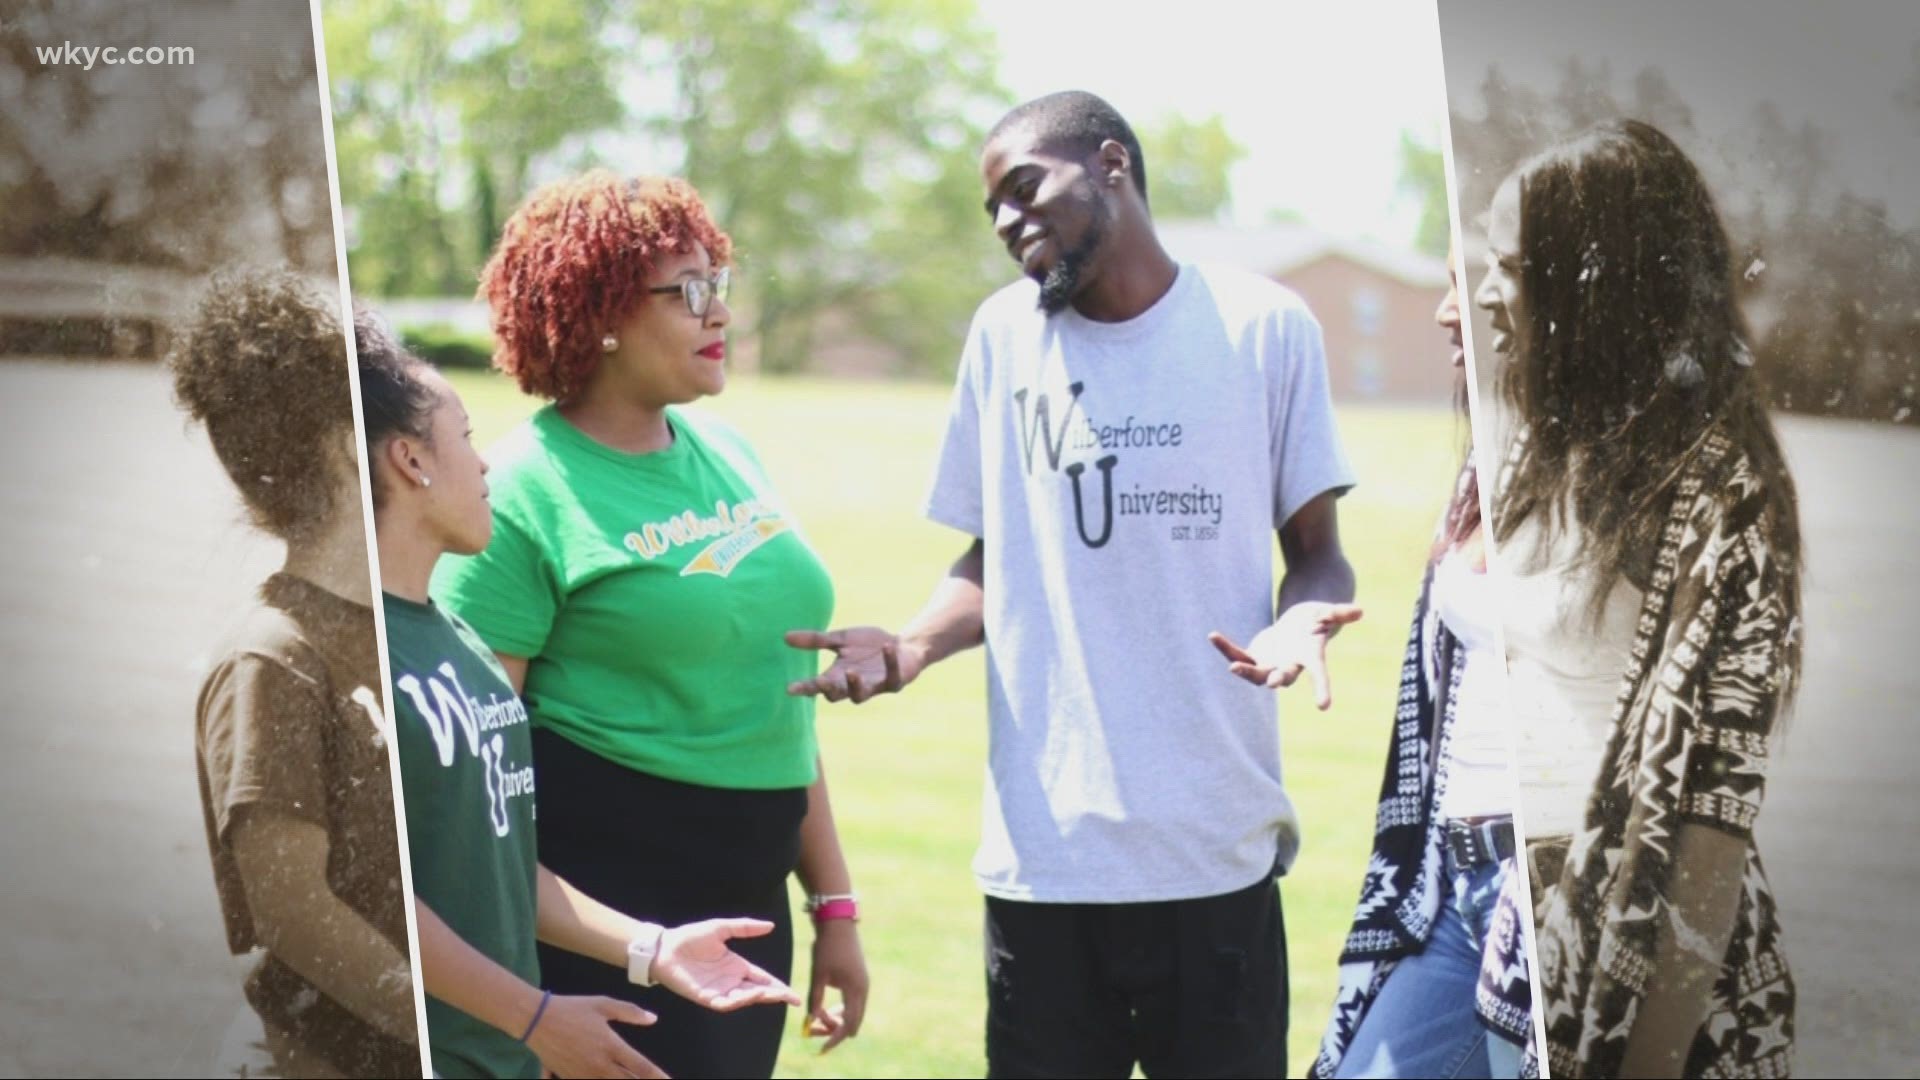 We want to tell you about a trailblazing university, right here in Ohio. Wilberforce University has been a courageous trendsetter since before the civil war.